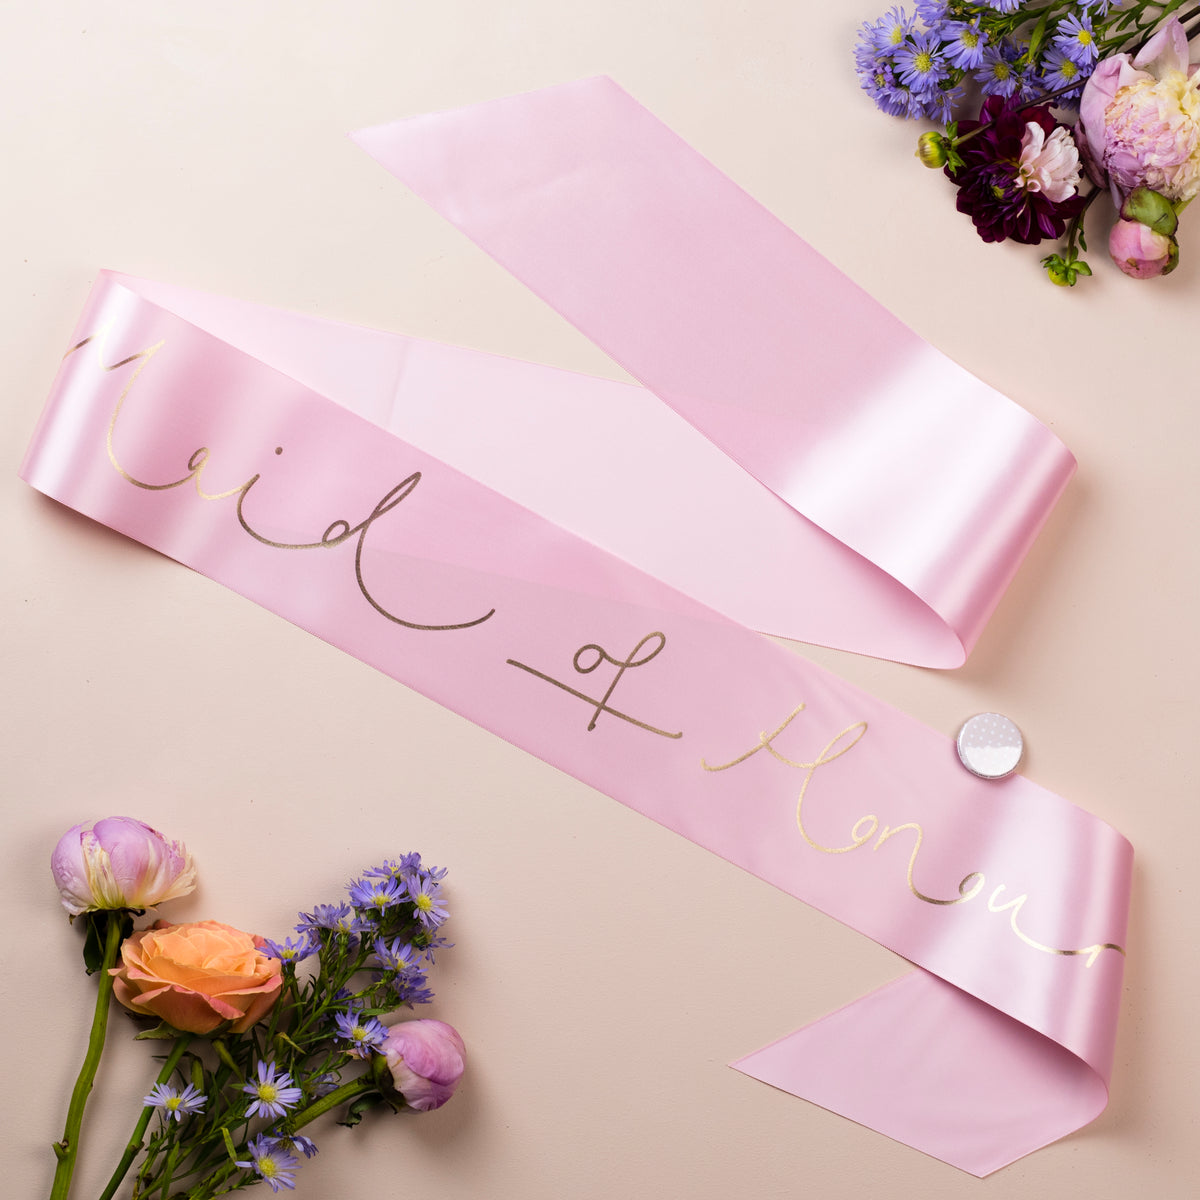 'Maid of Honour' Gold Foil Hand Lettered Hen Party Sash - Choice of Colours